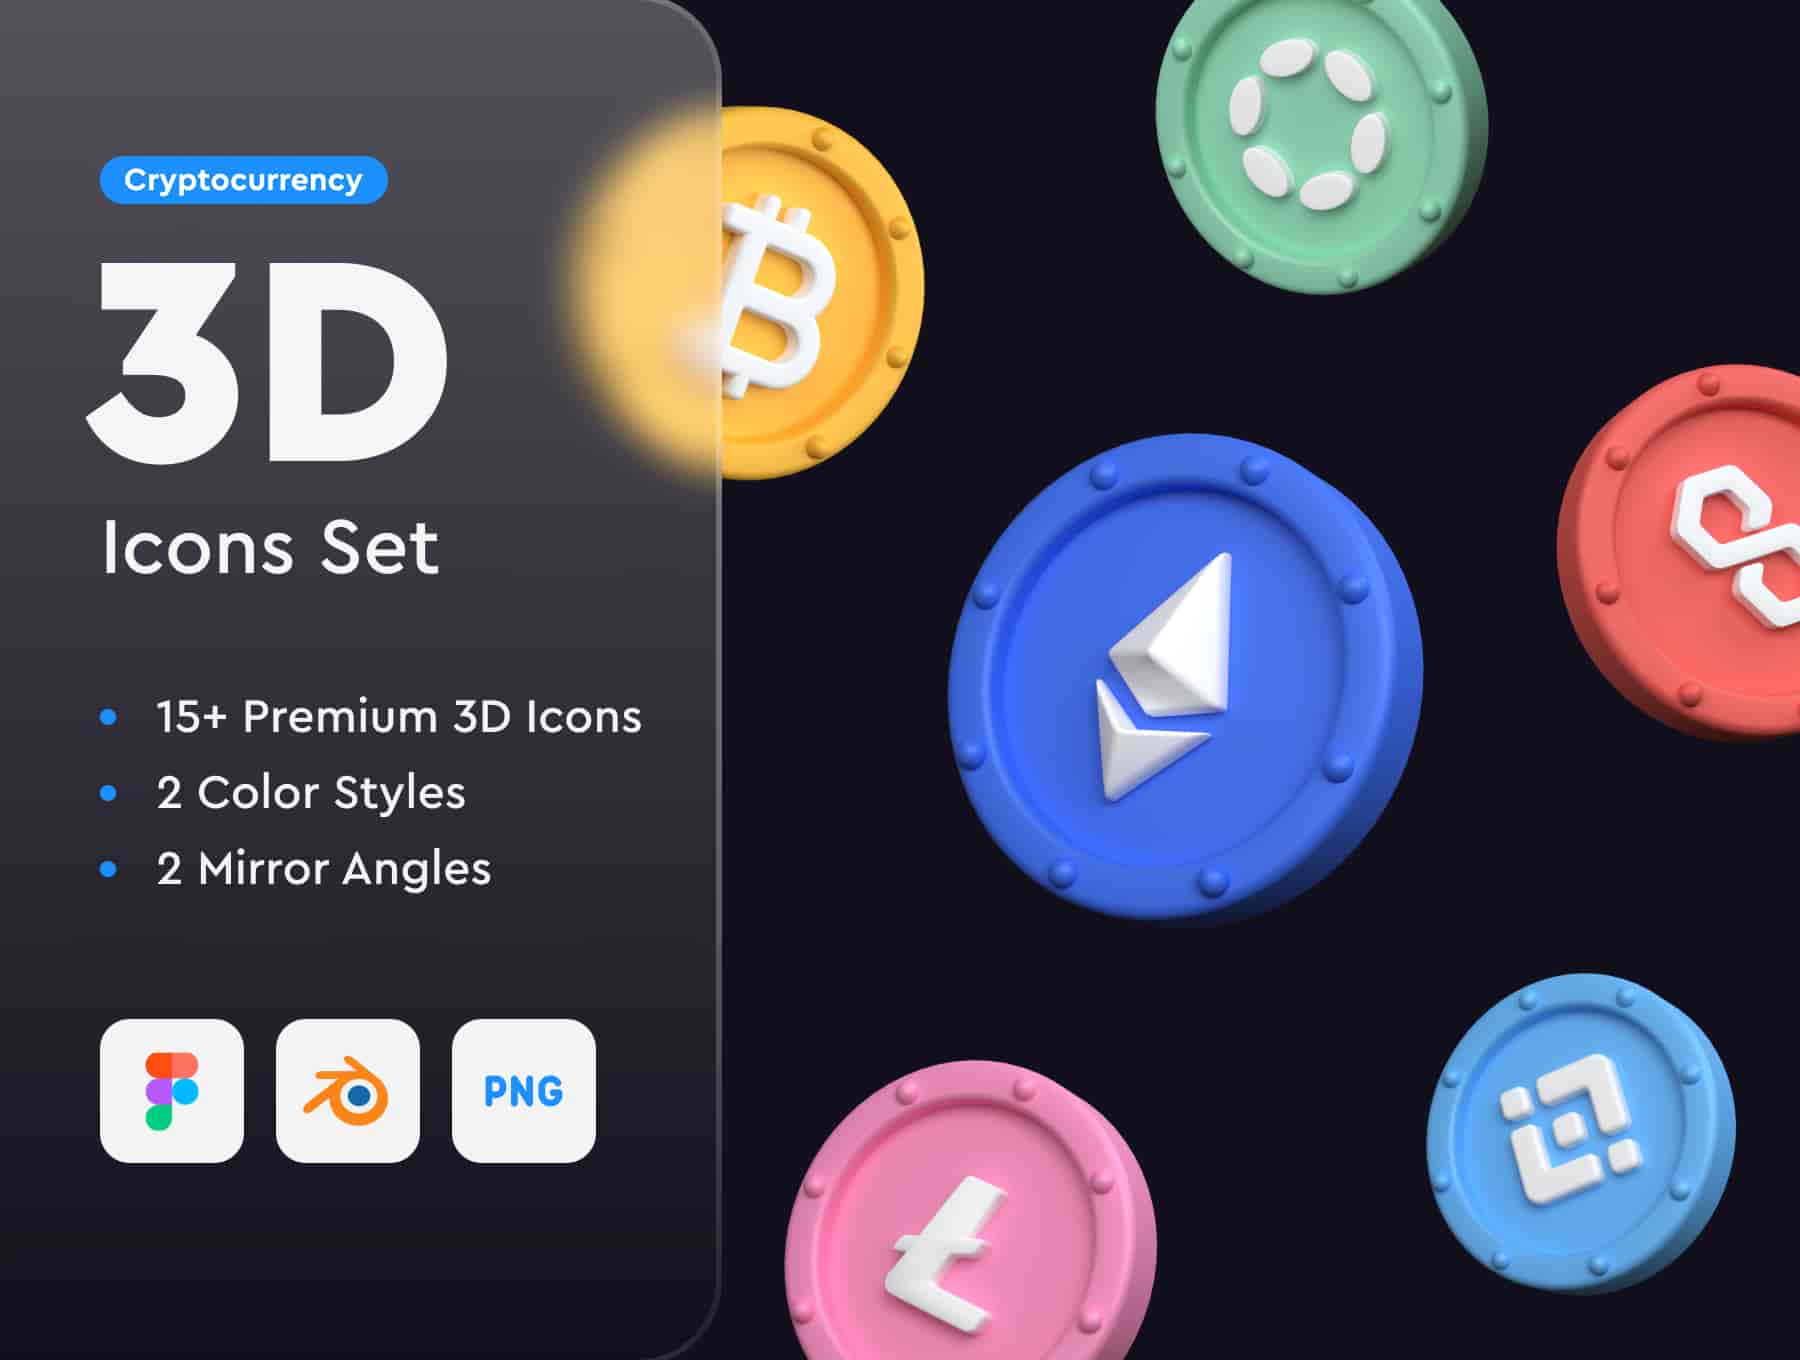 Cryptocurrency 3D Icons Set